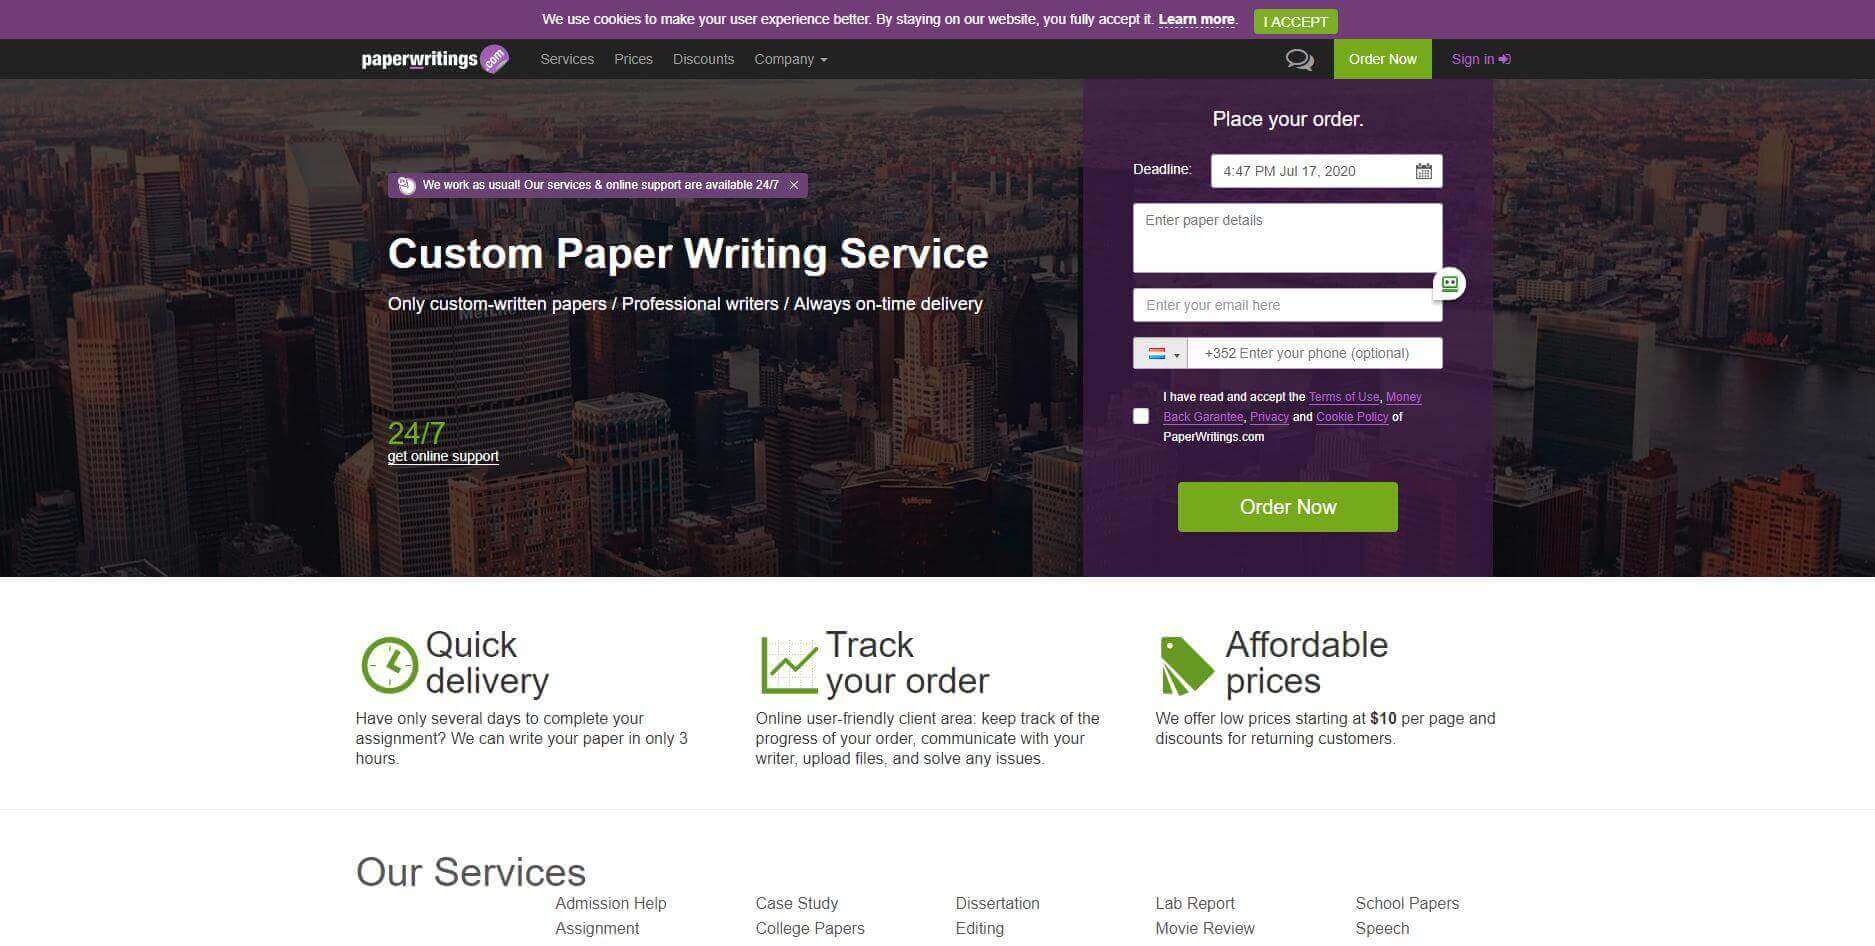 paperwritings.com overview